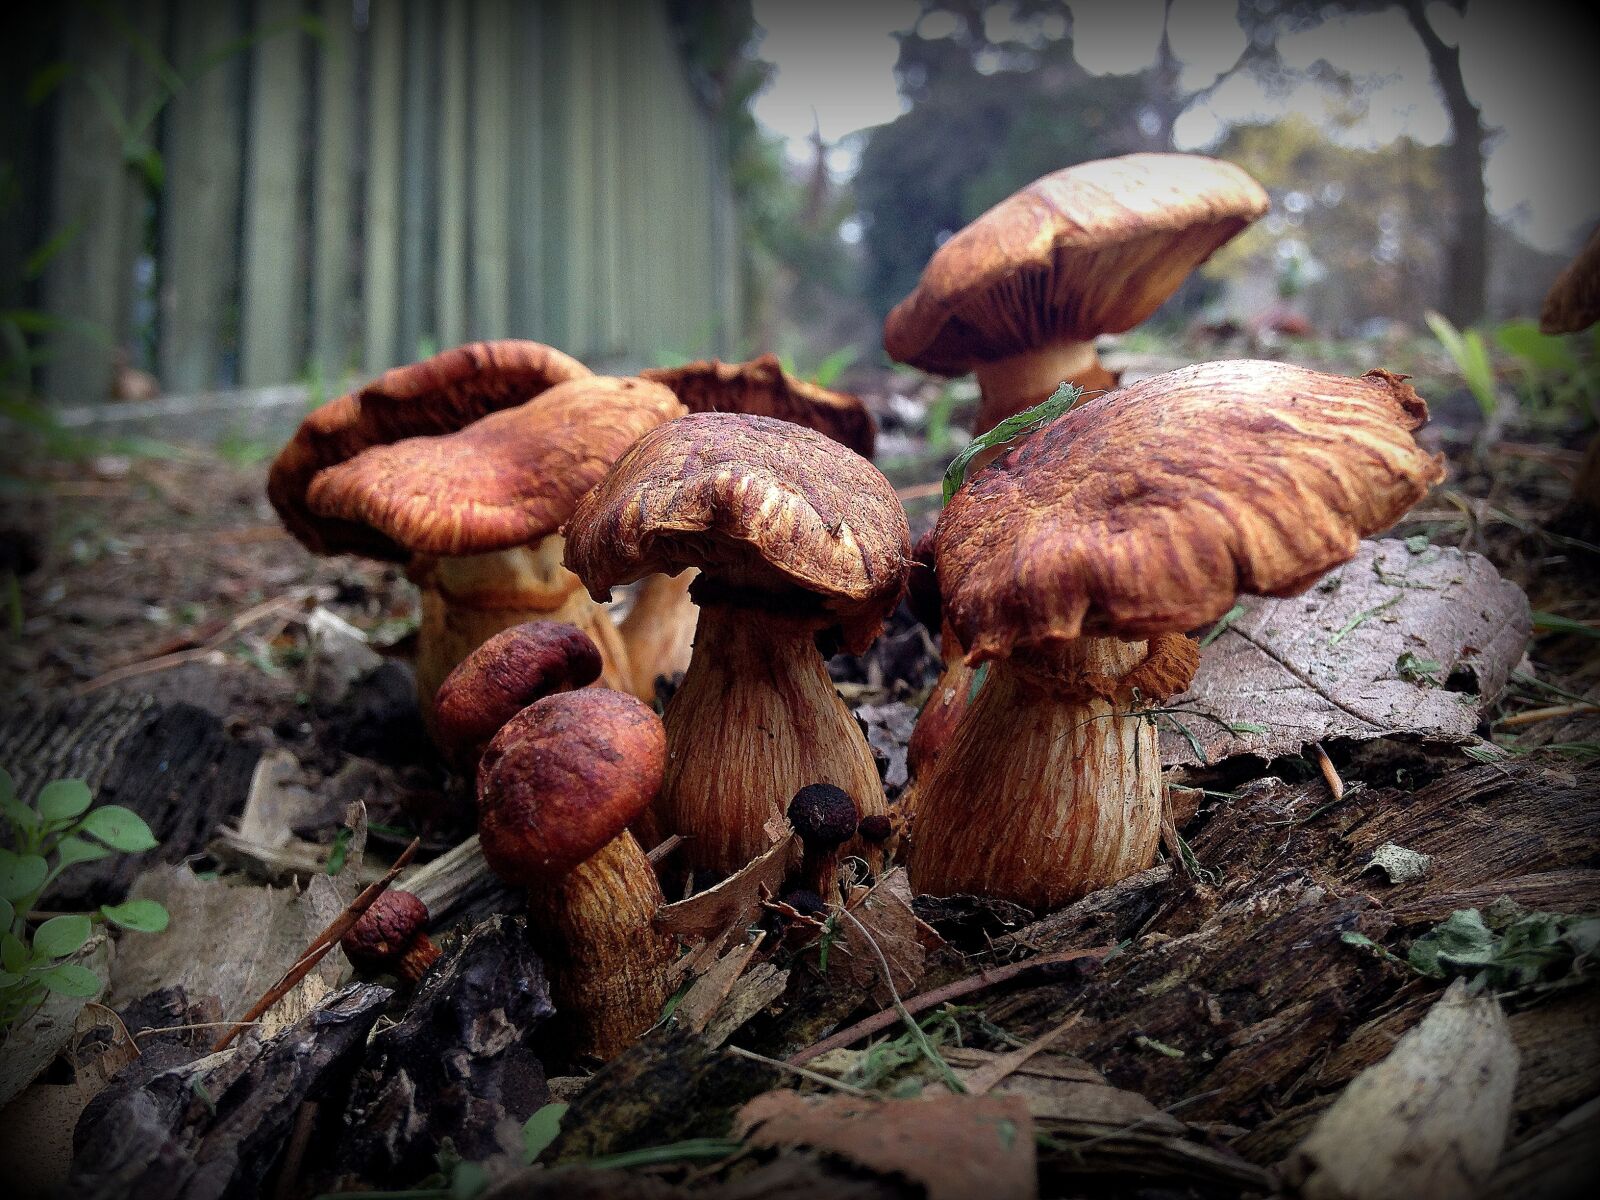 Apple iPhone 5c sample photo. Abstract, fungi, nature, toadstools photography